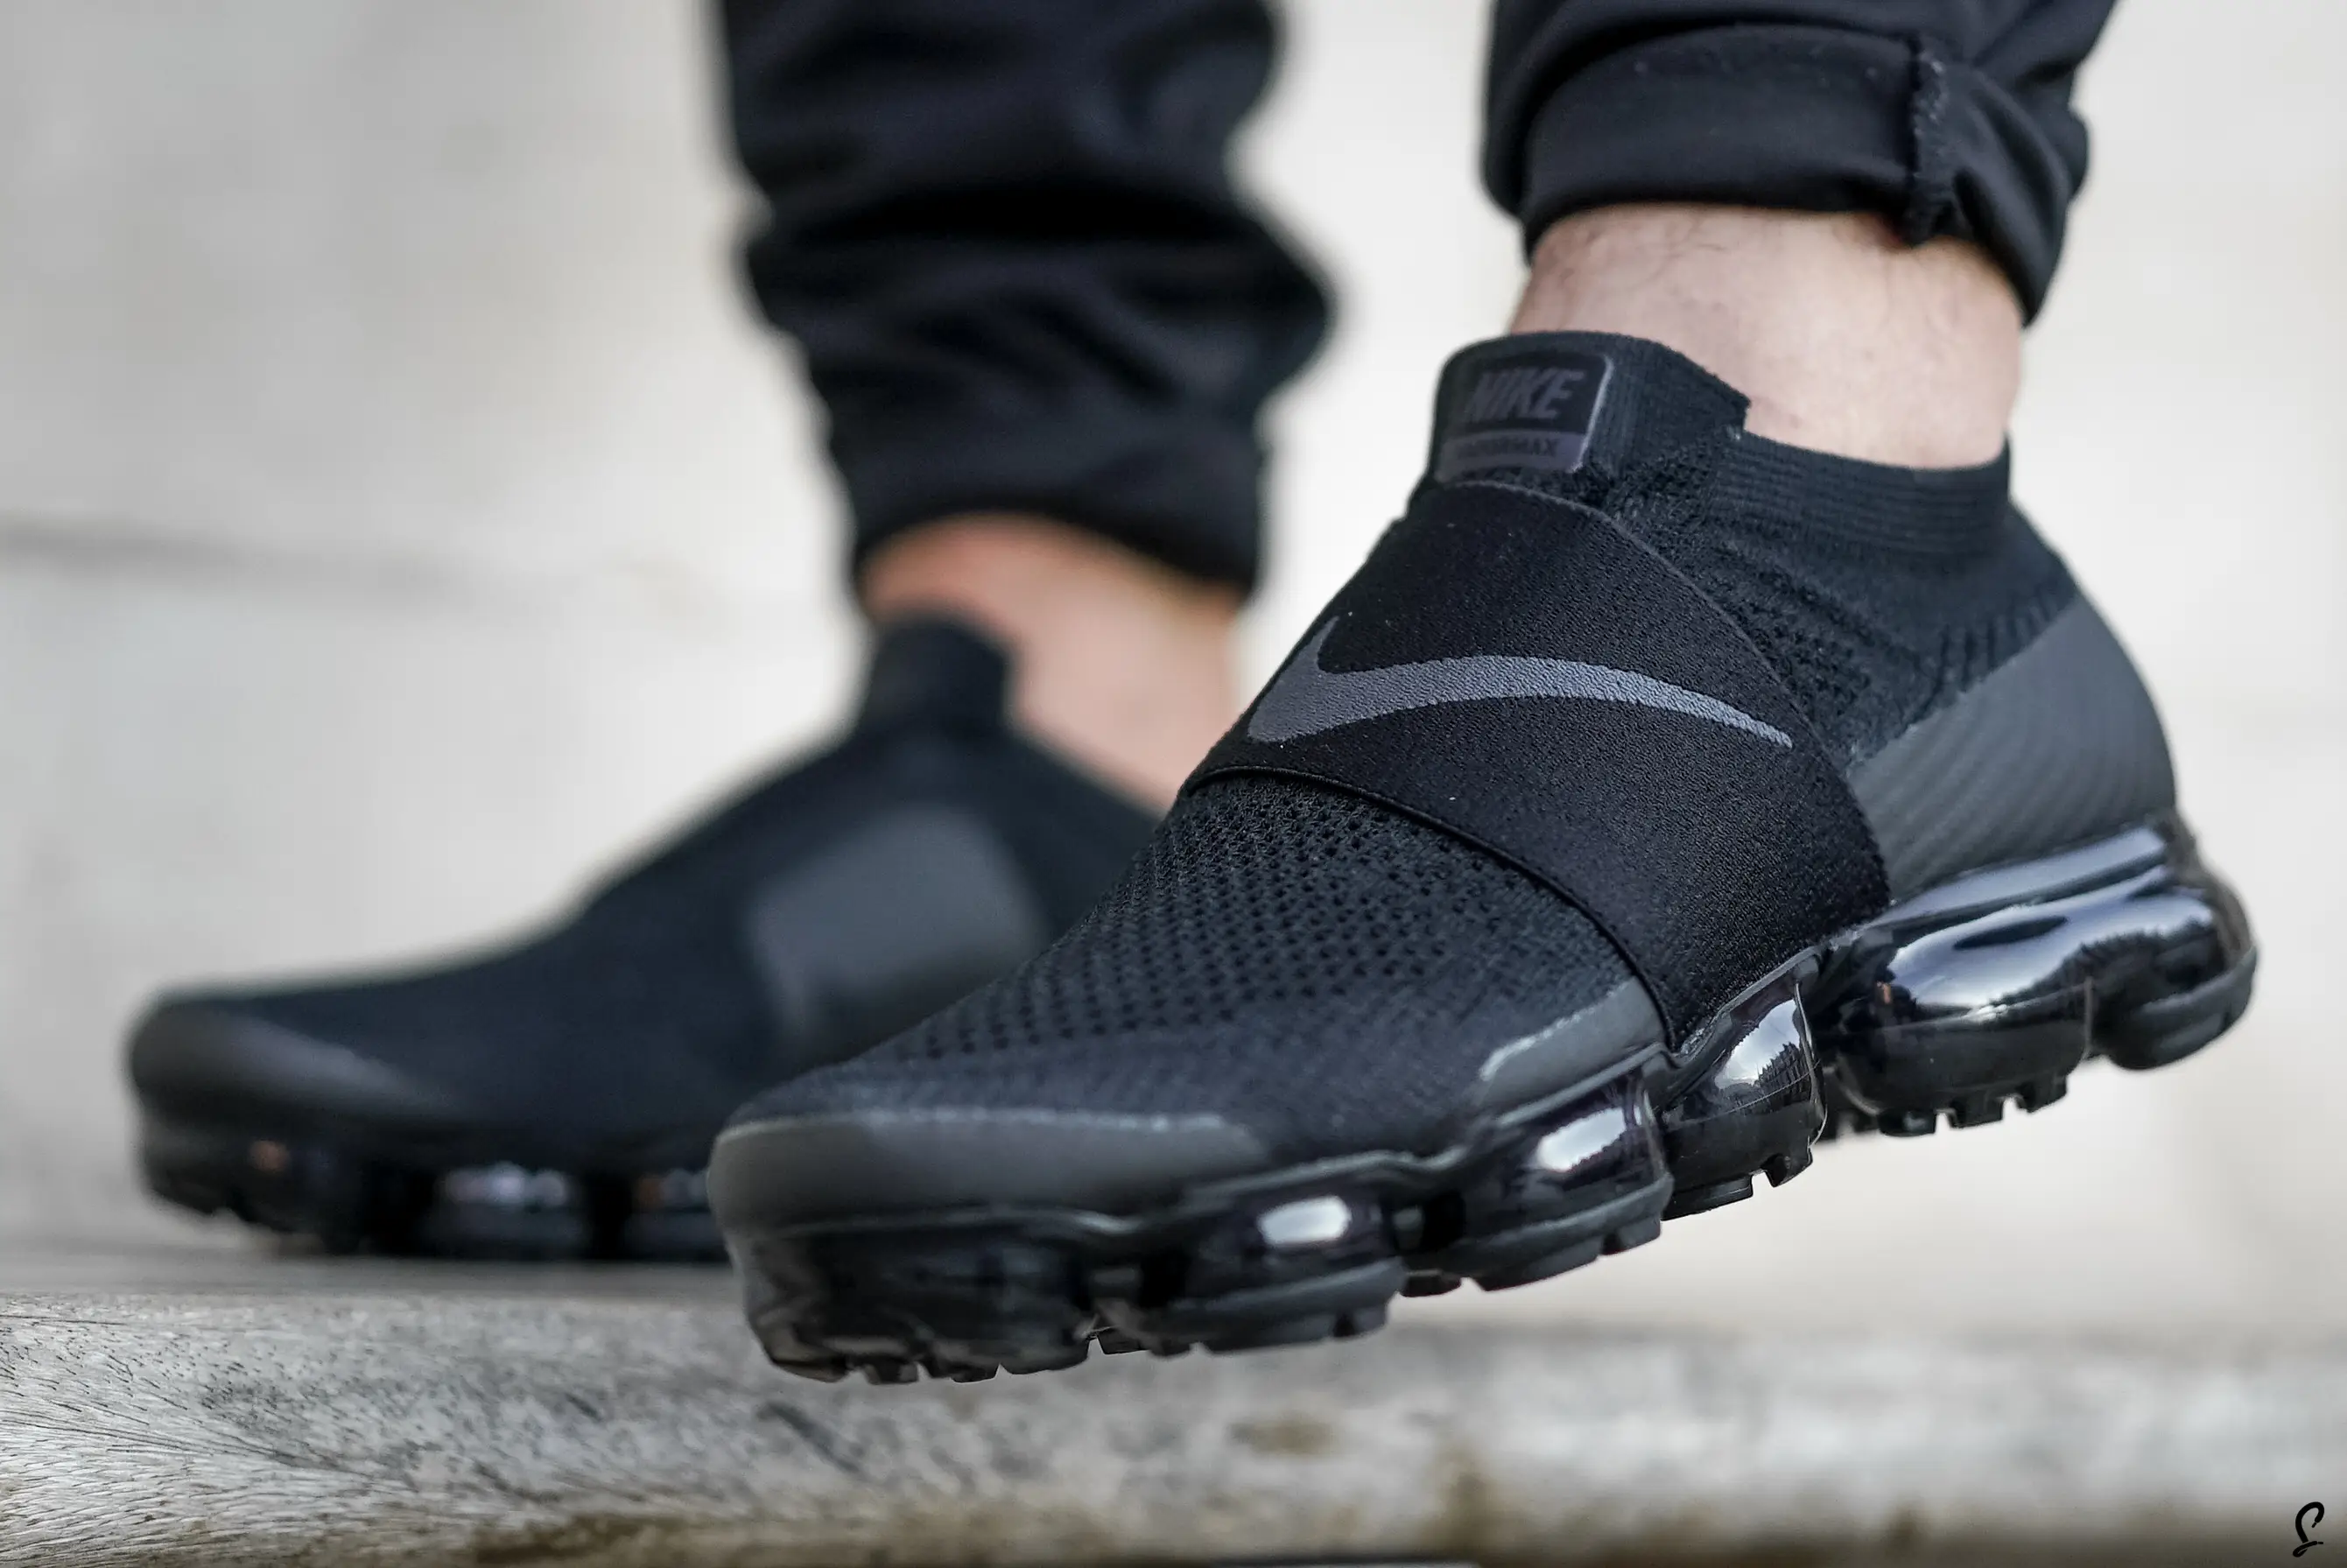 Closer Look At The Nike Air VaporMax Moc Triple Black | The Sole Supplier